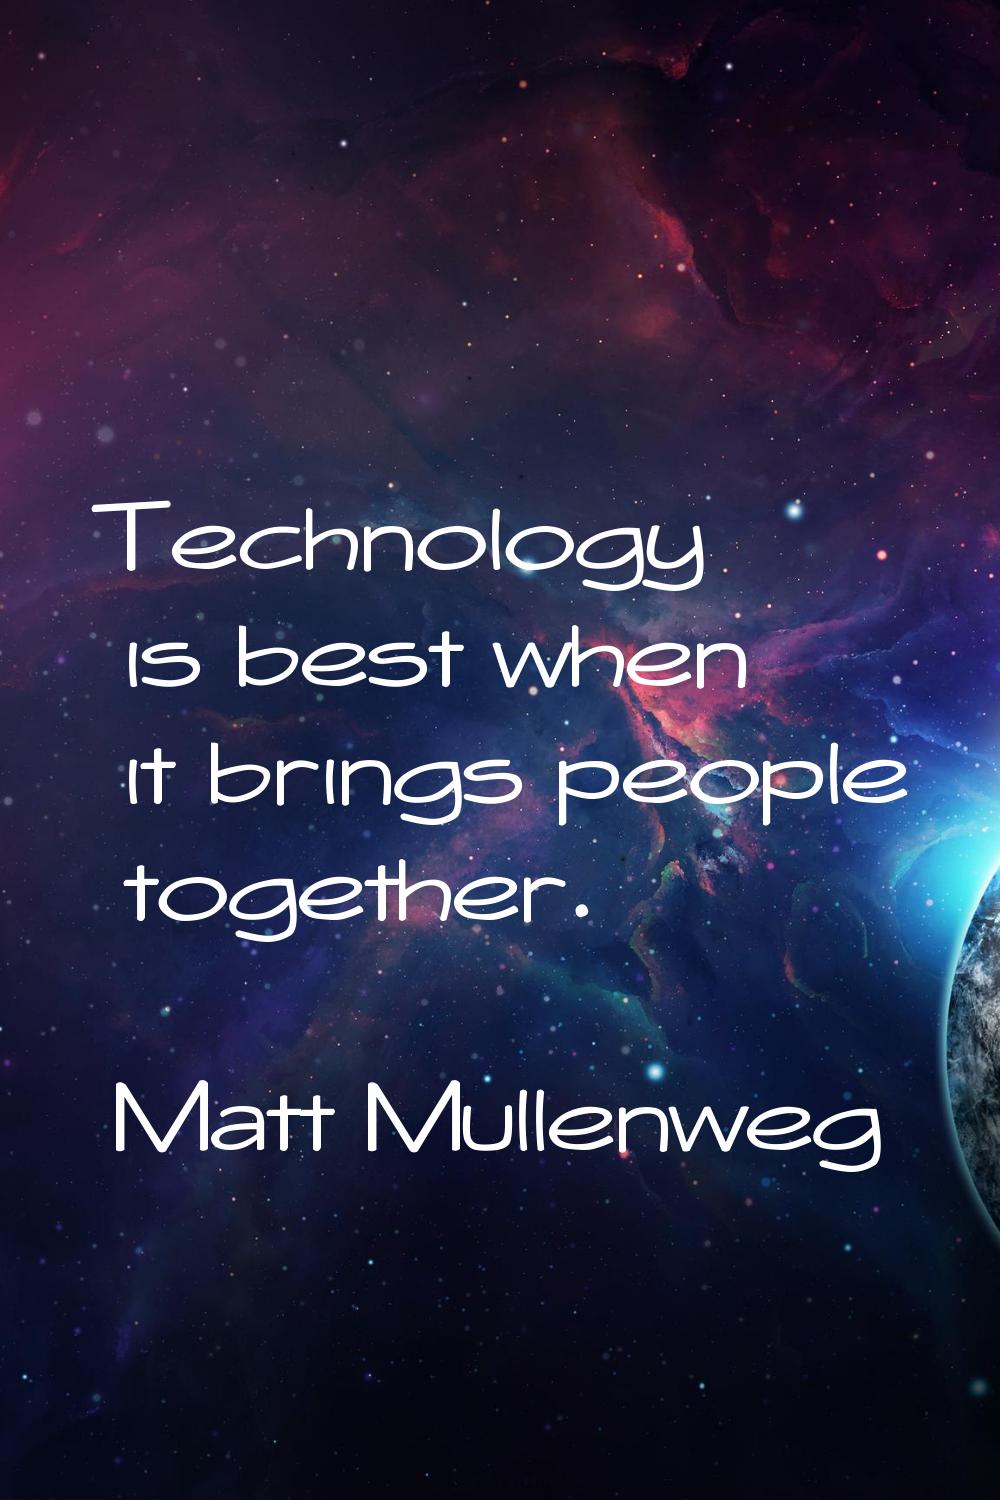 Technology is best when it brings people together.